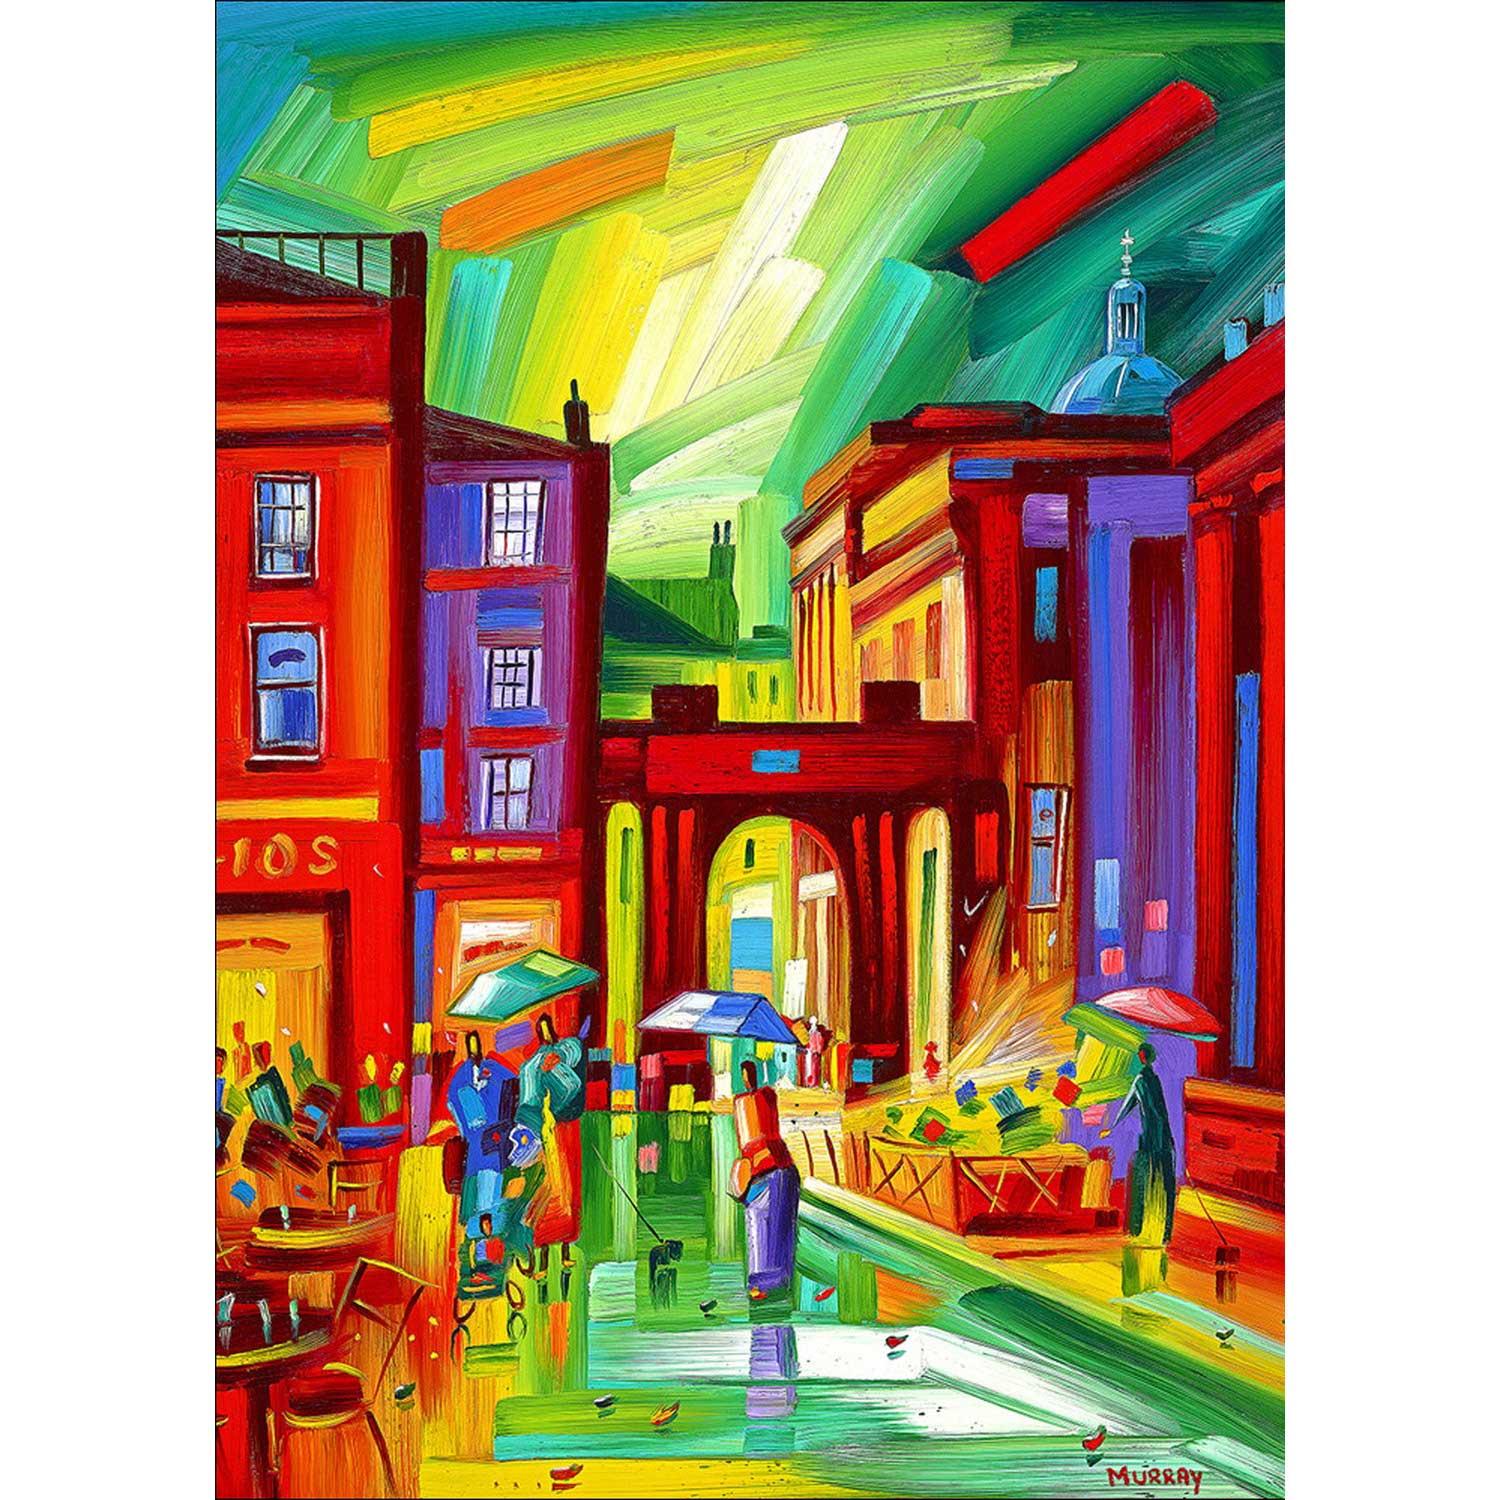 Royal Exchange Square 2 by artist Raymond Murray